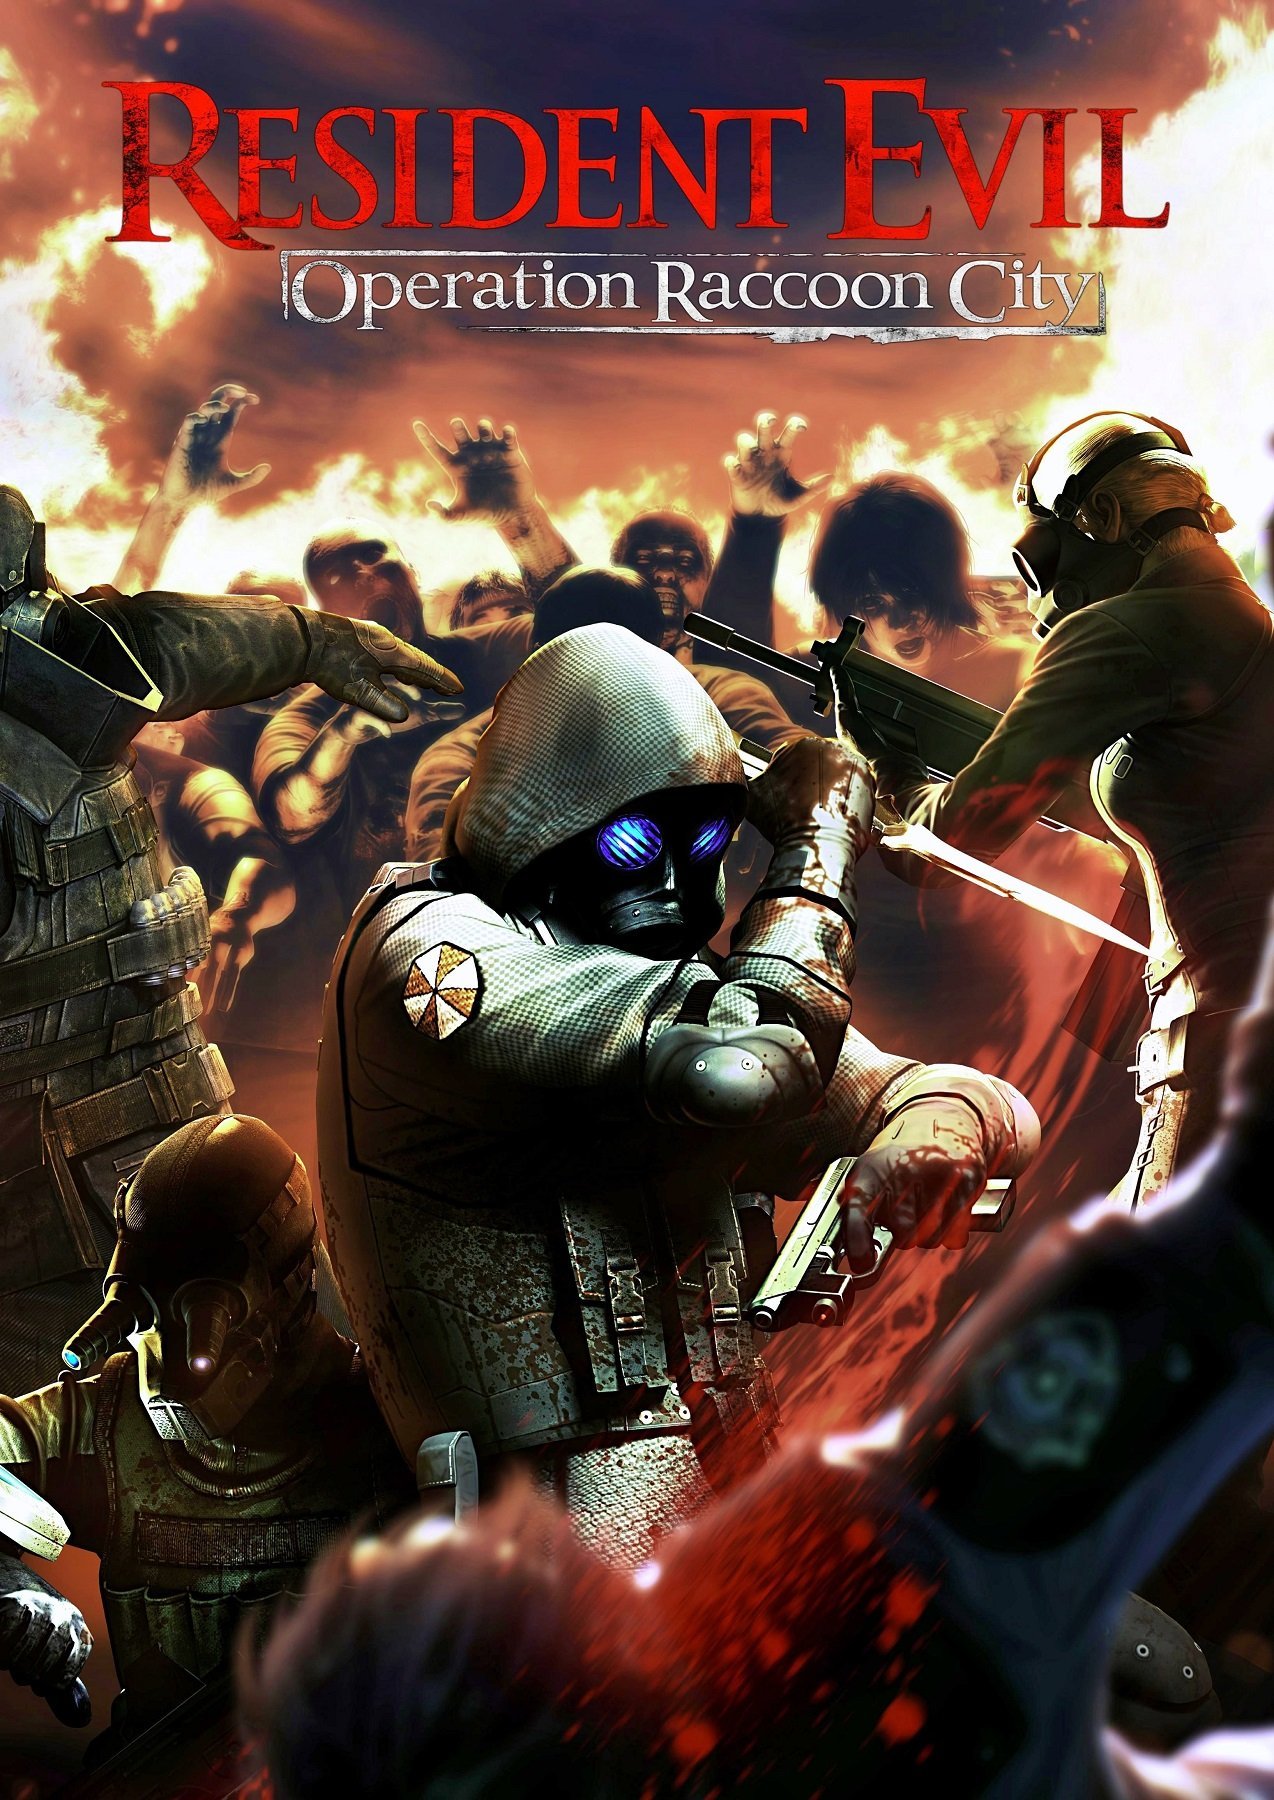 Image of Resident Evil: Operation Raccoon City